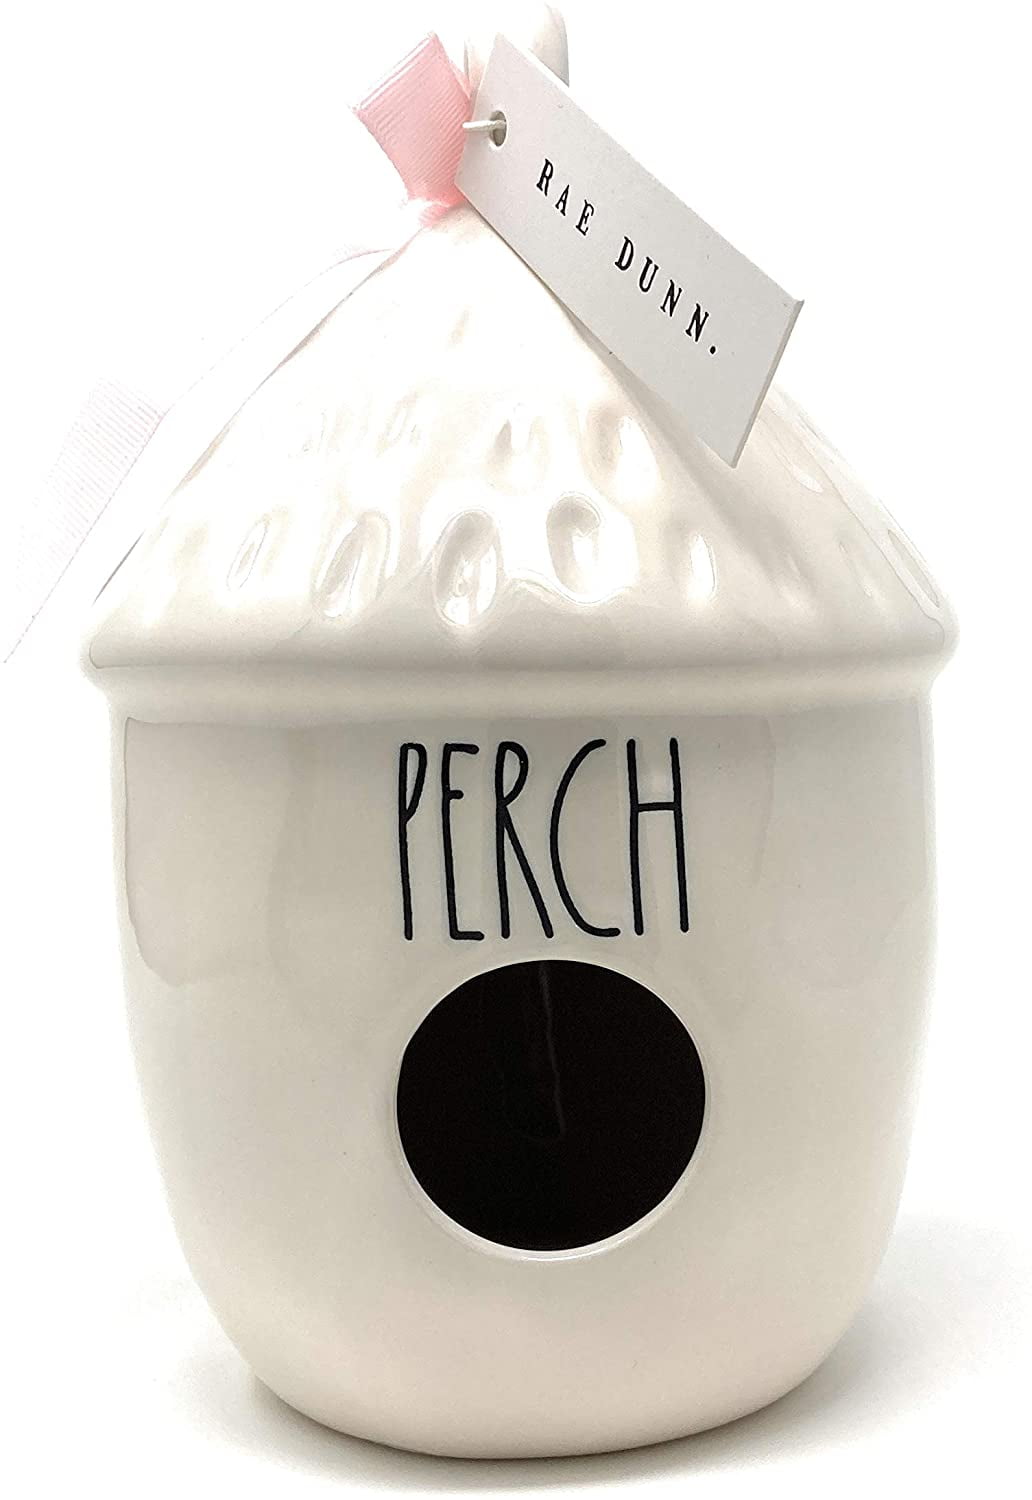 Details about   RAE DUNN White PERCH Ceramic BIRDHOUSE Nest SLANT ROOF Brand NEW ~ FREE SHIP! 